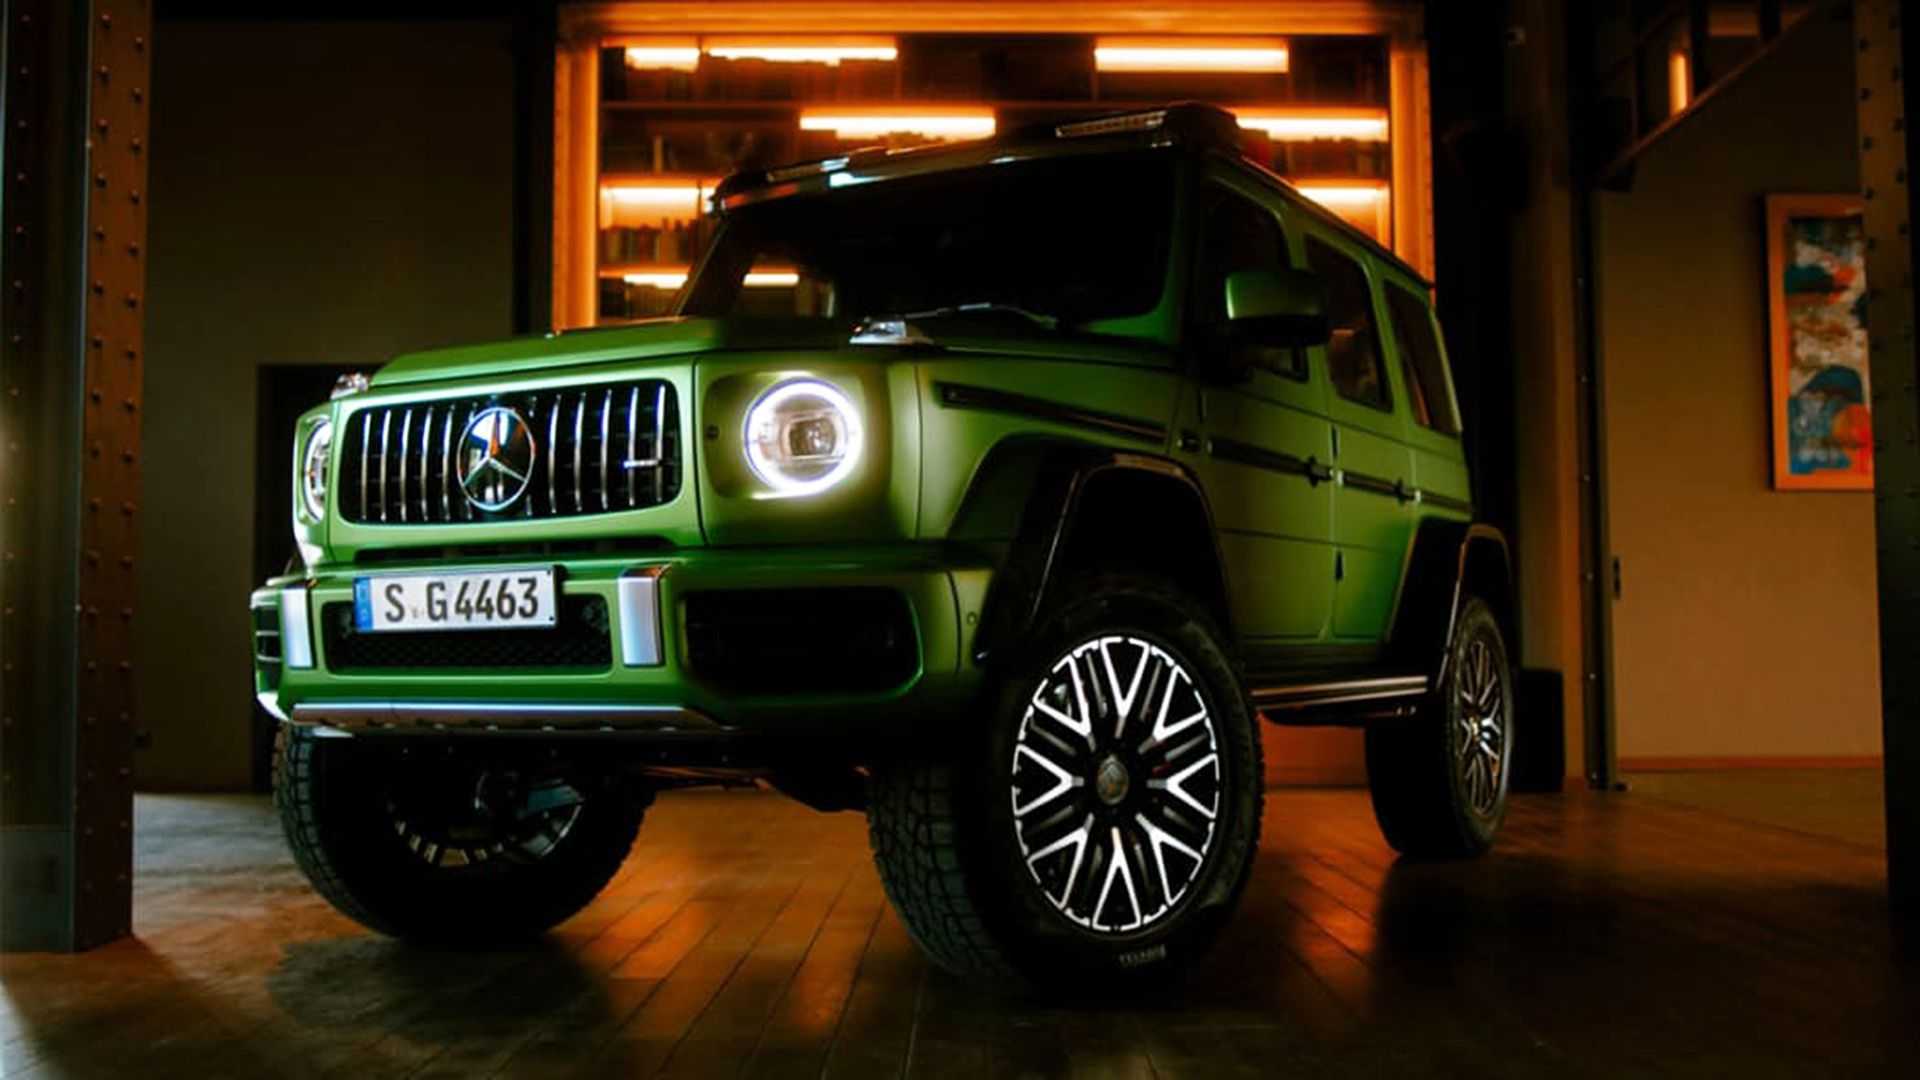 The 2022 MercedesAMG G 63 4x4 Squared Is "the Most GClass Ever